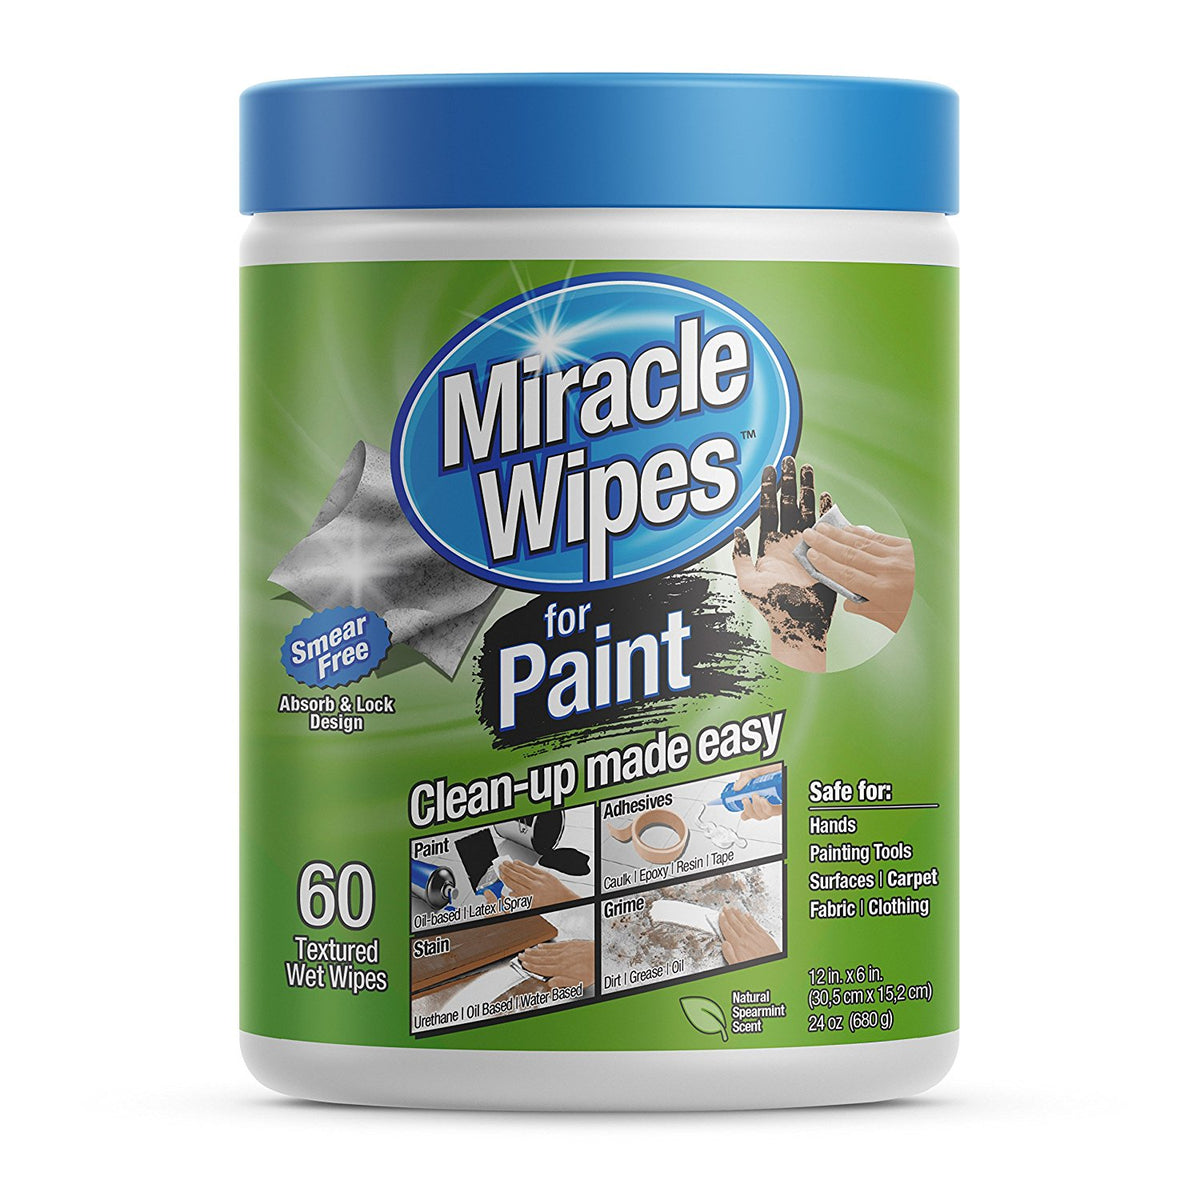 MiracleWipes 3263 Multi-Purpose Cleaning Wipes for Paint Cleanup, 60-Count